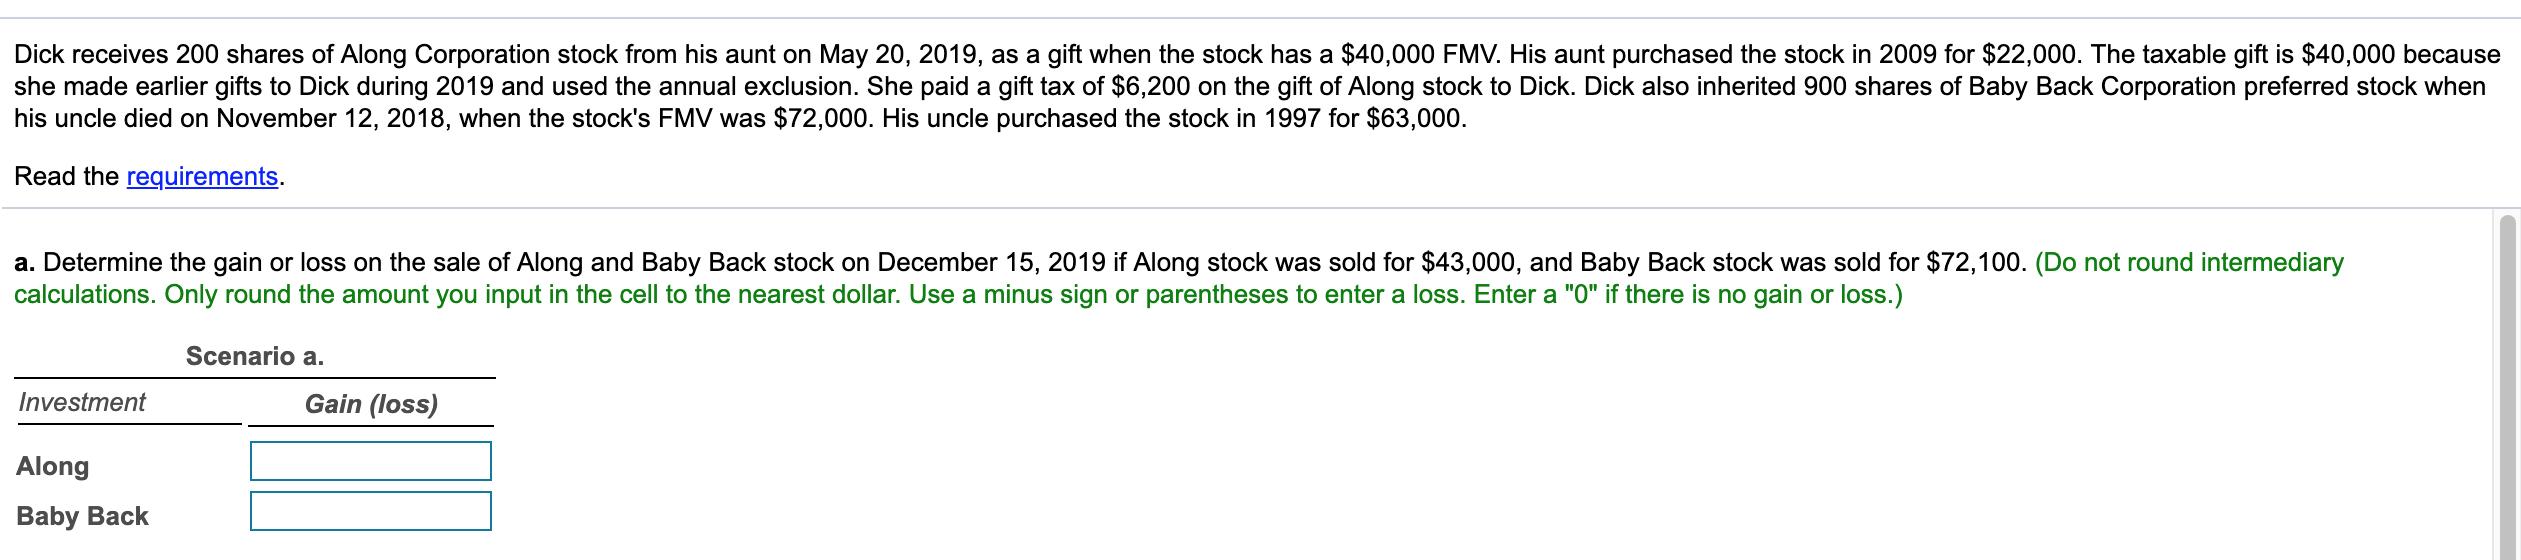 Dick receives 200 shares of Along Corporation stock from his aunt on May 20, 2019, as a gift when the stock has a $40,000 FMV